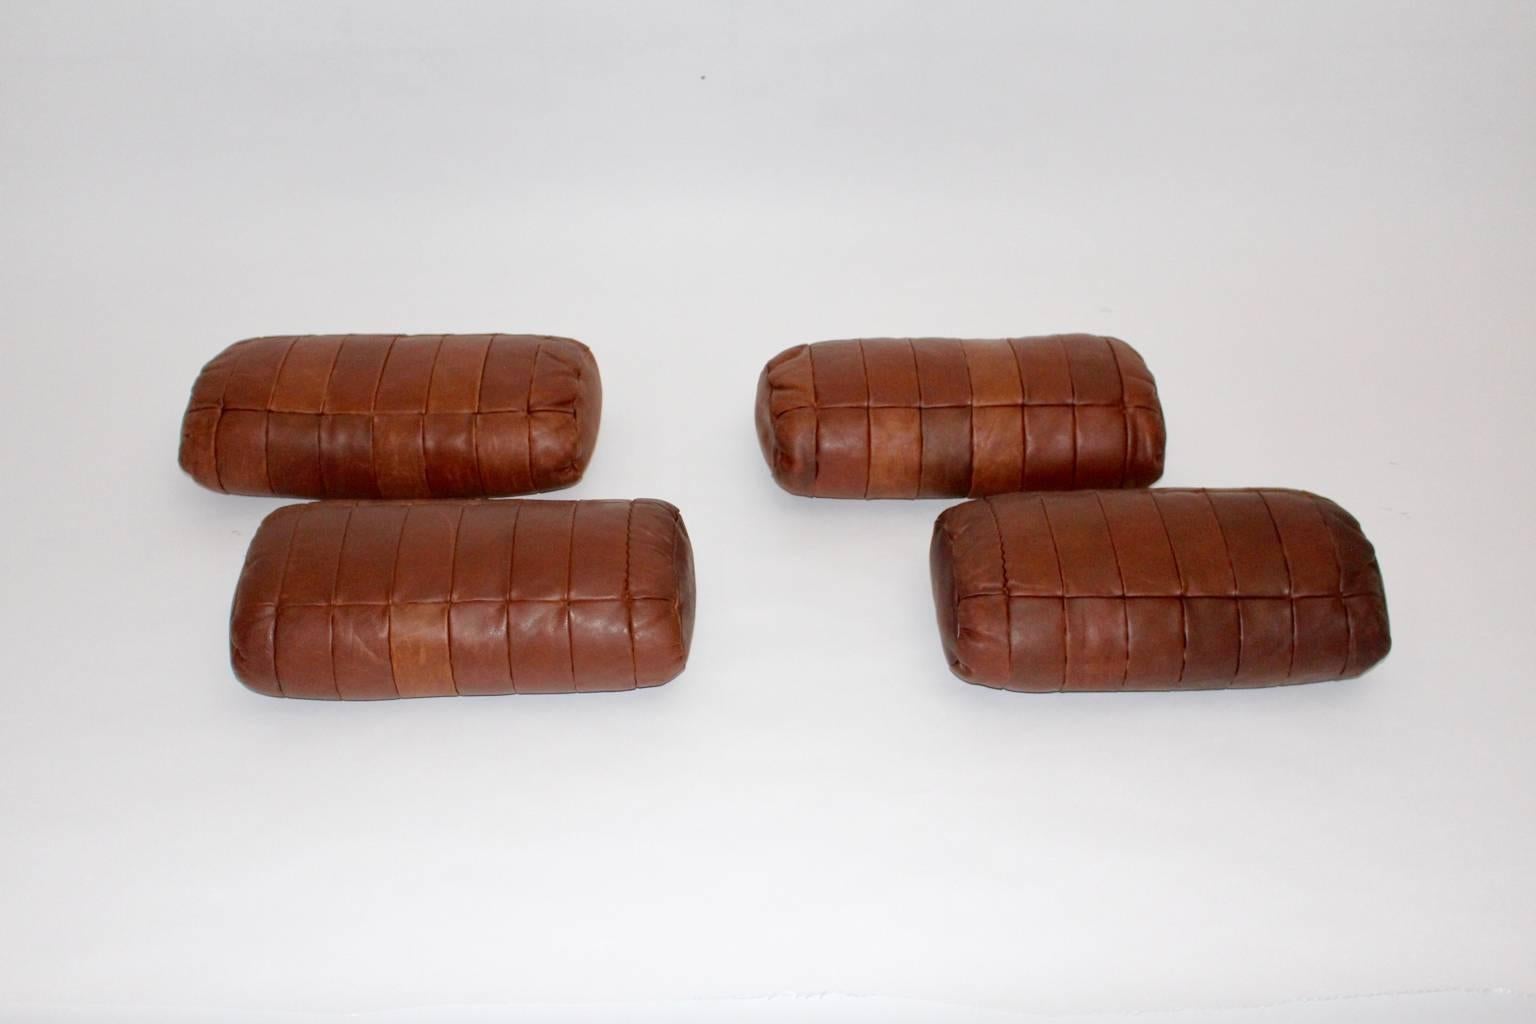 The Set of four  stitched leather pillows by De Sede 1970s Switzerland show a great patina.
The condition is very good.
        